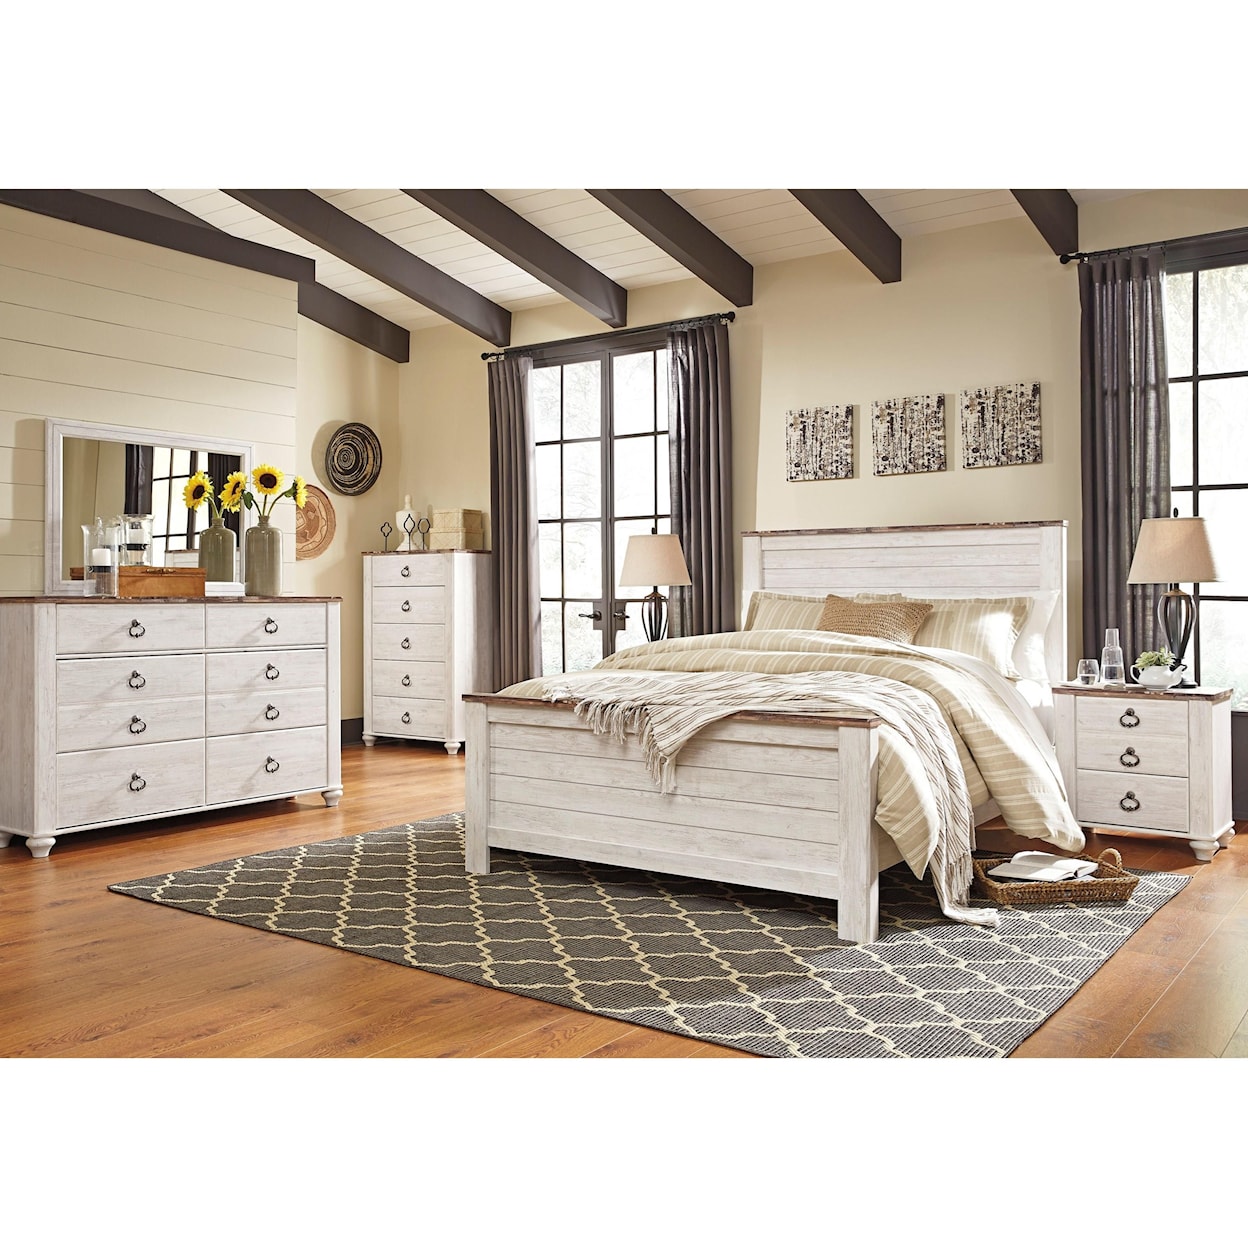 Signature Design by Ashley Willowton 6-Piece Queen Bedroom Group